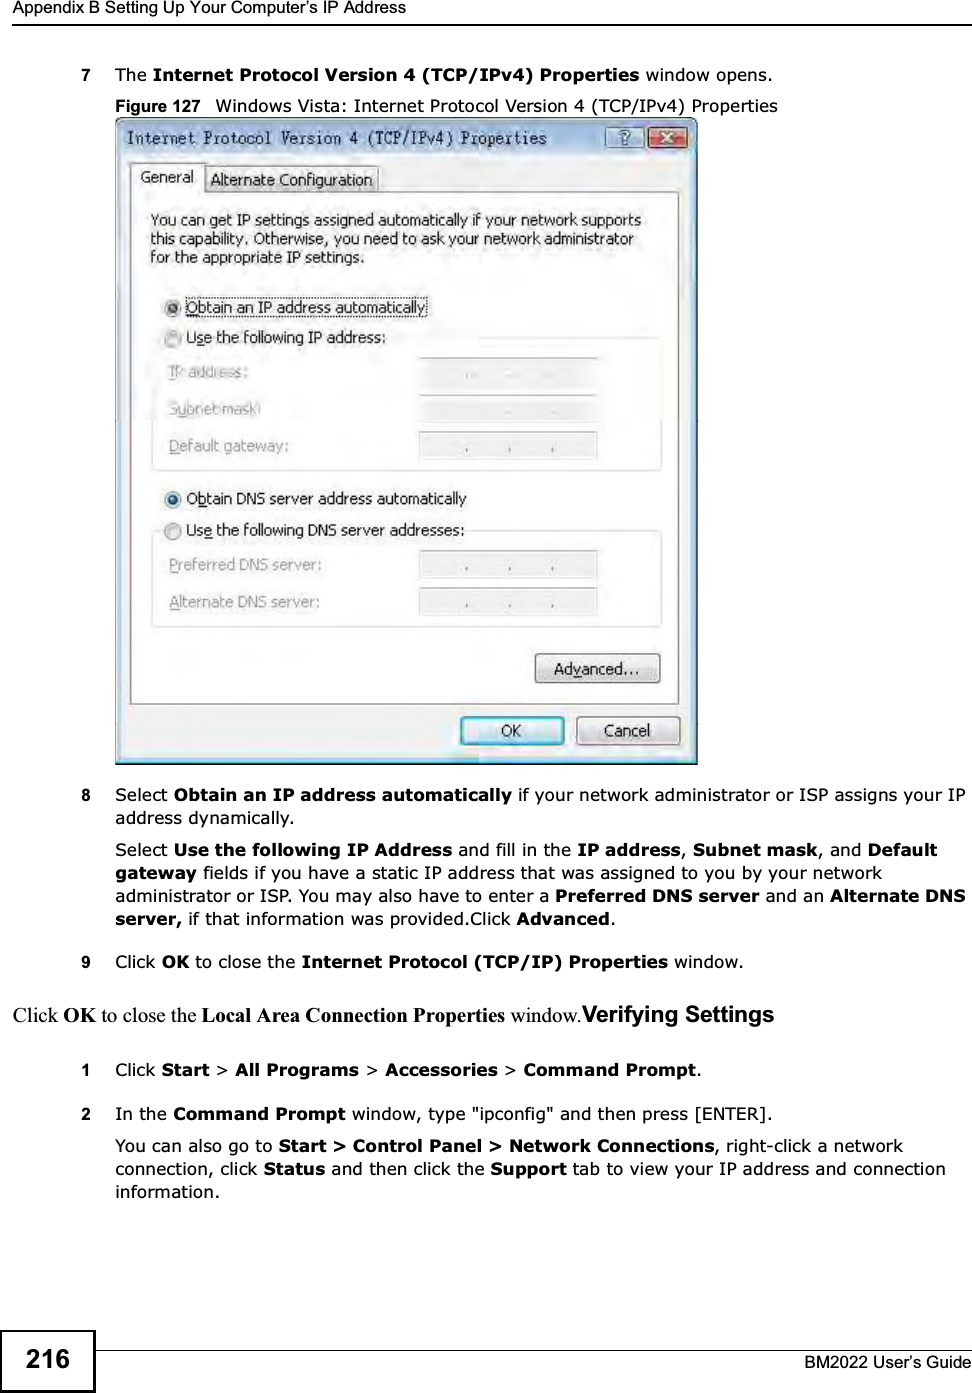 Appendix B Setting Up Your Computers IP AddressBM2022 Users Guide2167The Internet Protocol Version 4 (TCP/IPv4) Properties window opens.Figure 127   Windows Vista: Internet Protocol Version 4 (TCP/IPv4) Properties8Select Obtain an IP address automatically if your network administrator or ISP assigns your IP address dynamically.Select Use the following IP Address and fill in the IP address, Subnet mask, and Default gateway fields if you have a static IP address that was assigned to you by your network administrator or ISP. You may also have to enter a Preferred DNS server and an Alternate DNS server, if that information was provided.Click Advanced.9Click OK to close the Internet Protocol (TCP/IP) Properties window.Click OK to close the Local Area Connection Properties window.Verifying Settings1Click Start &gt; All Programs &gt; Accessories &gt; Command Prompt.2In the Command Prompt window, type &quot;ipconfig&quot; and then press [ENTER]. You can also go to Start &gt; Control Panel &gt; Network Connections, right-click a network connection, click Status and then click the Support tab to view your IP address and connection information.